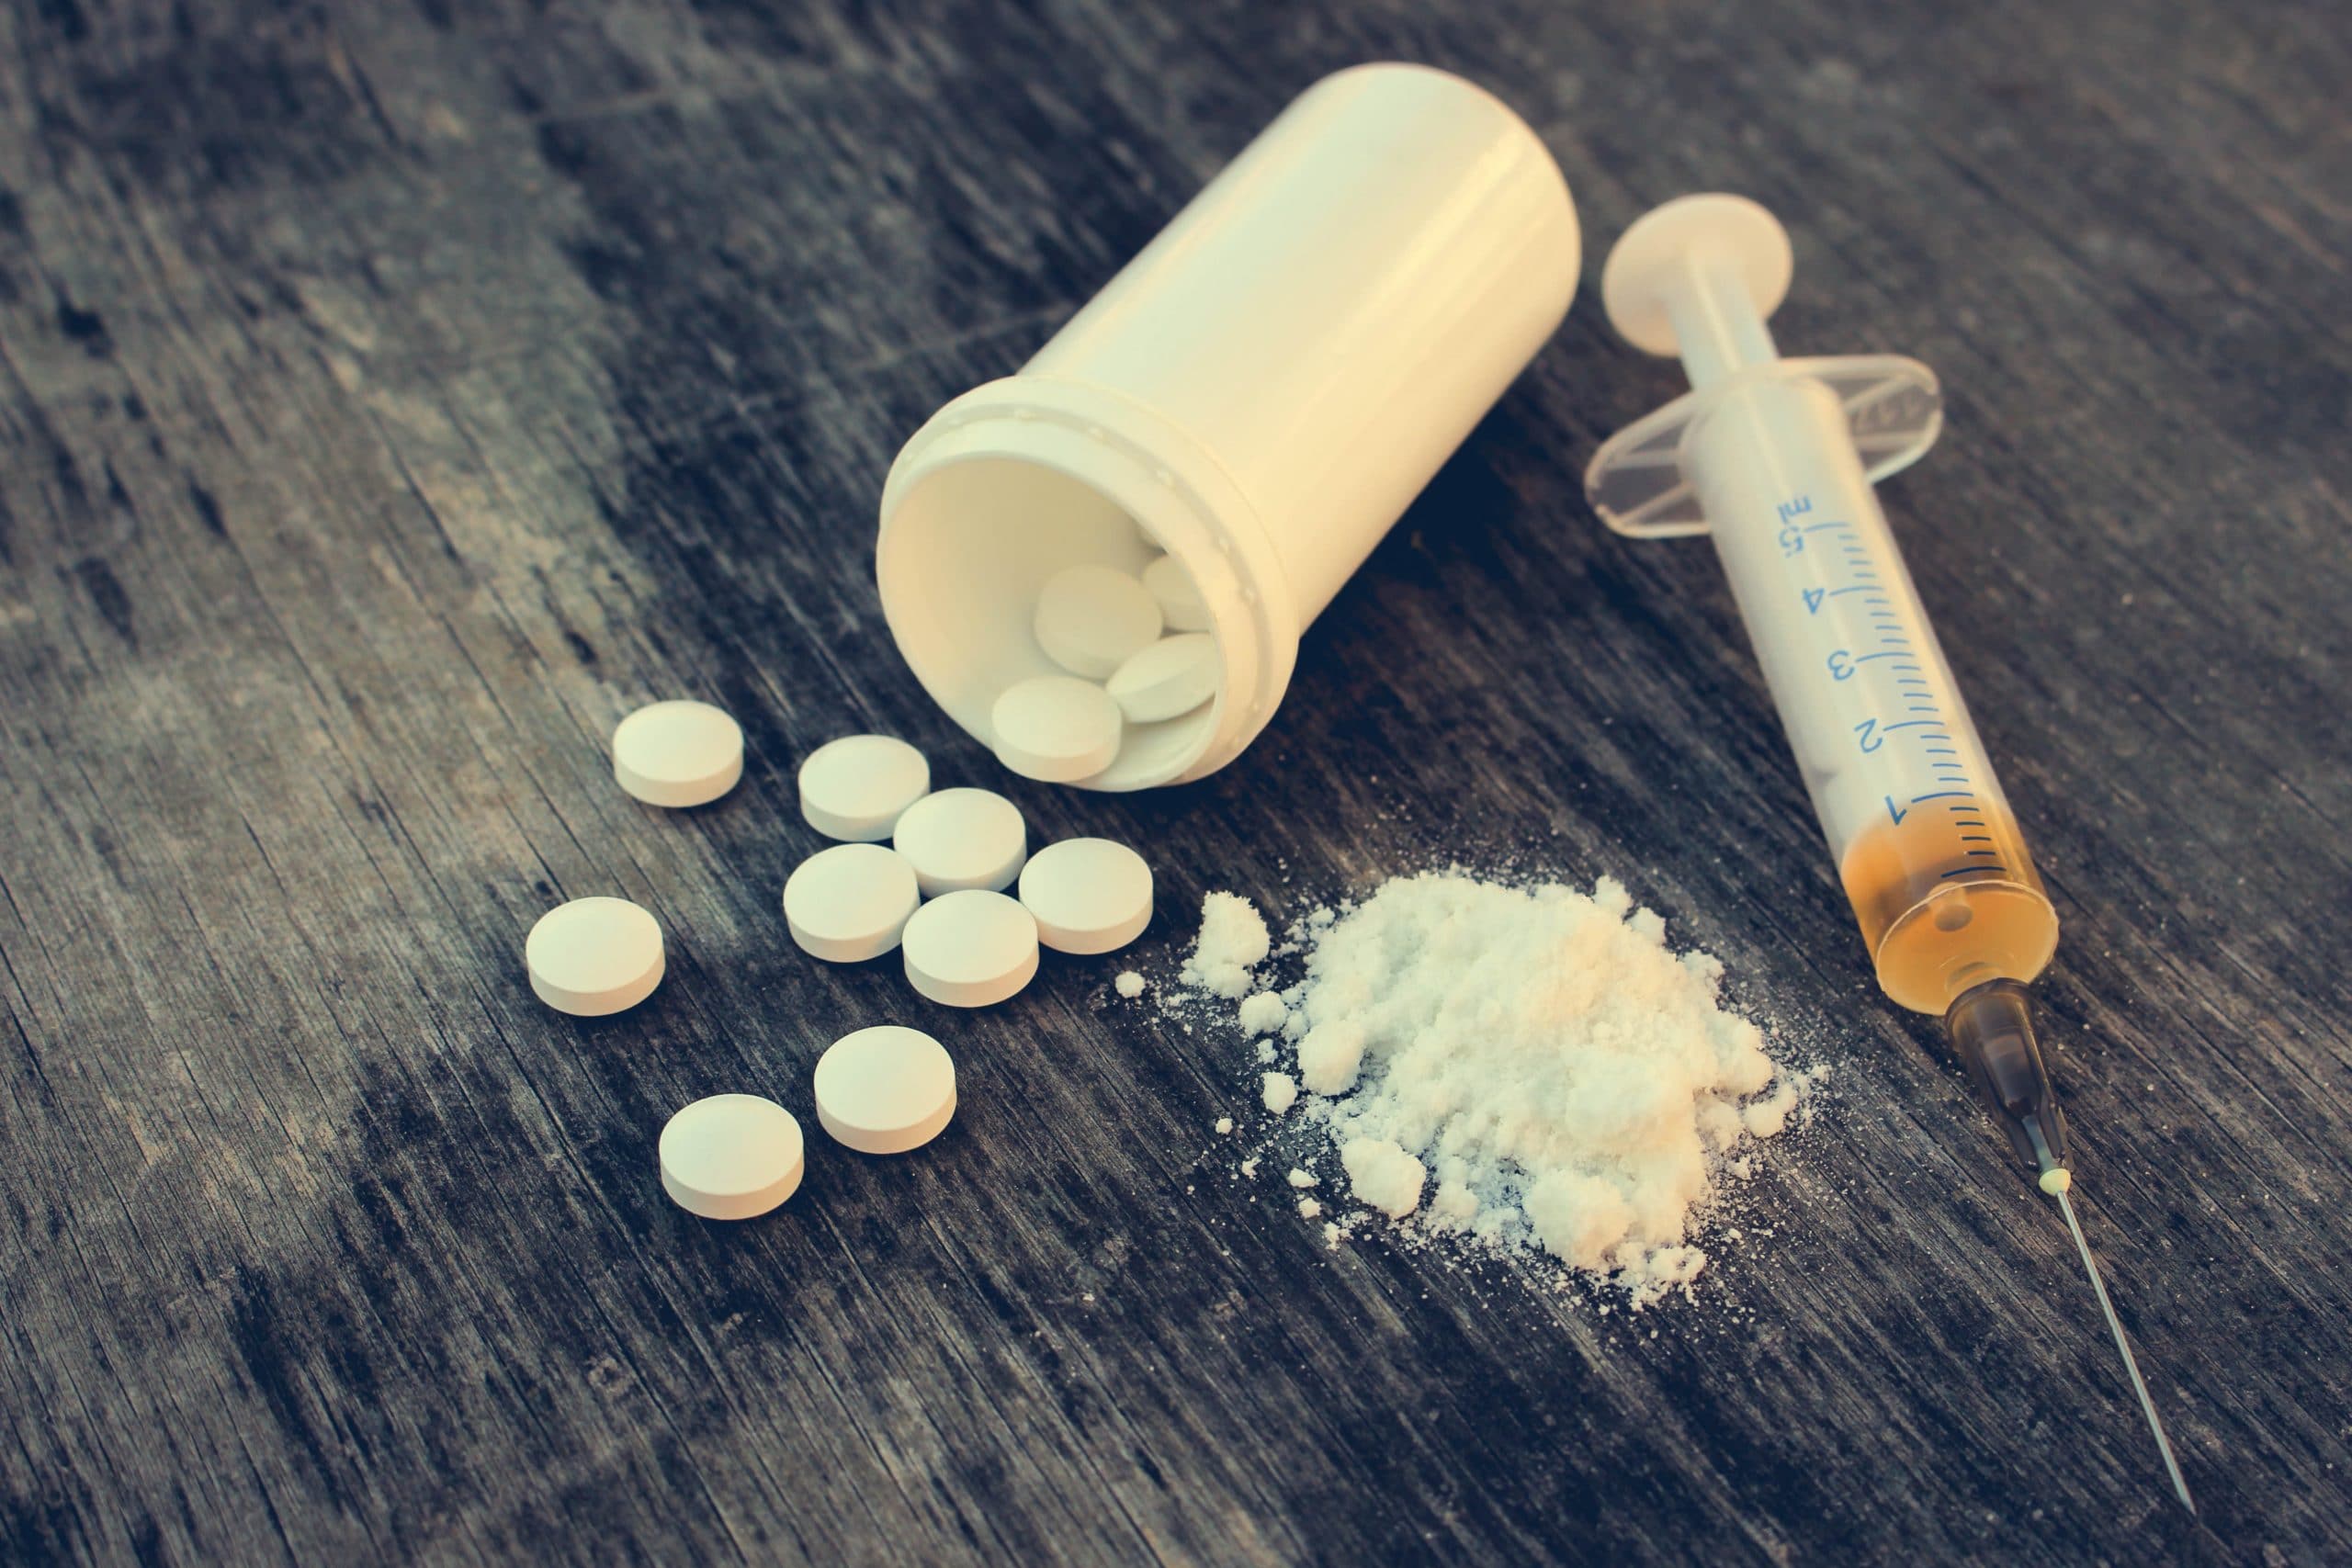 Which Drugs Have the Harshest Possession Penalties in Minnesota?